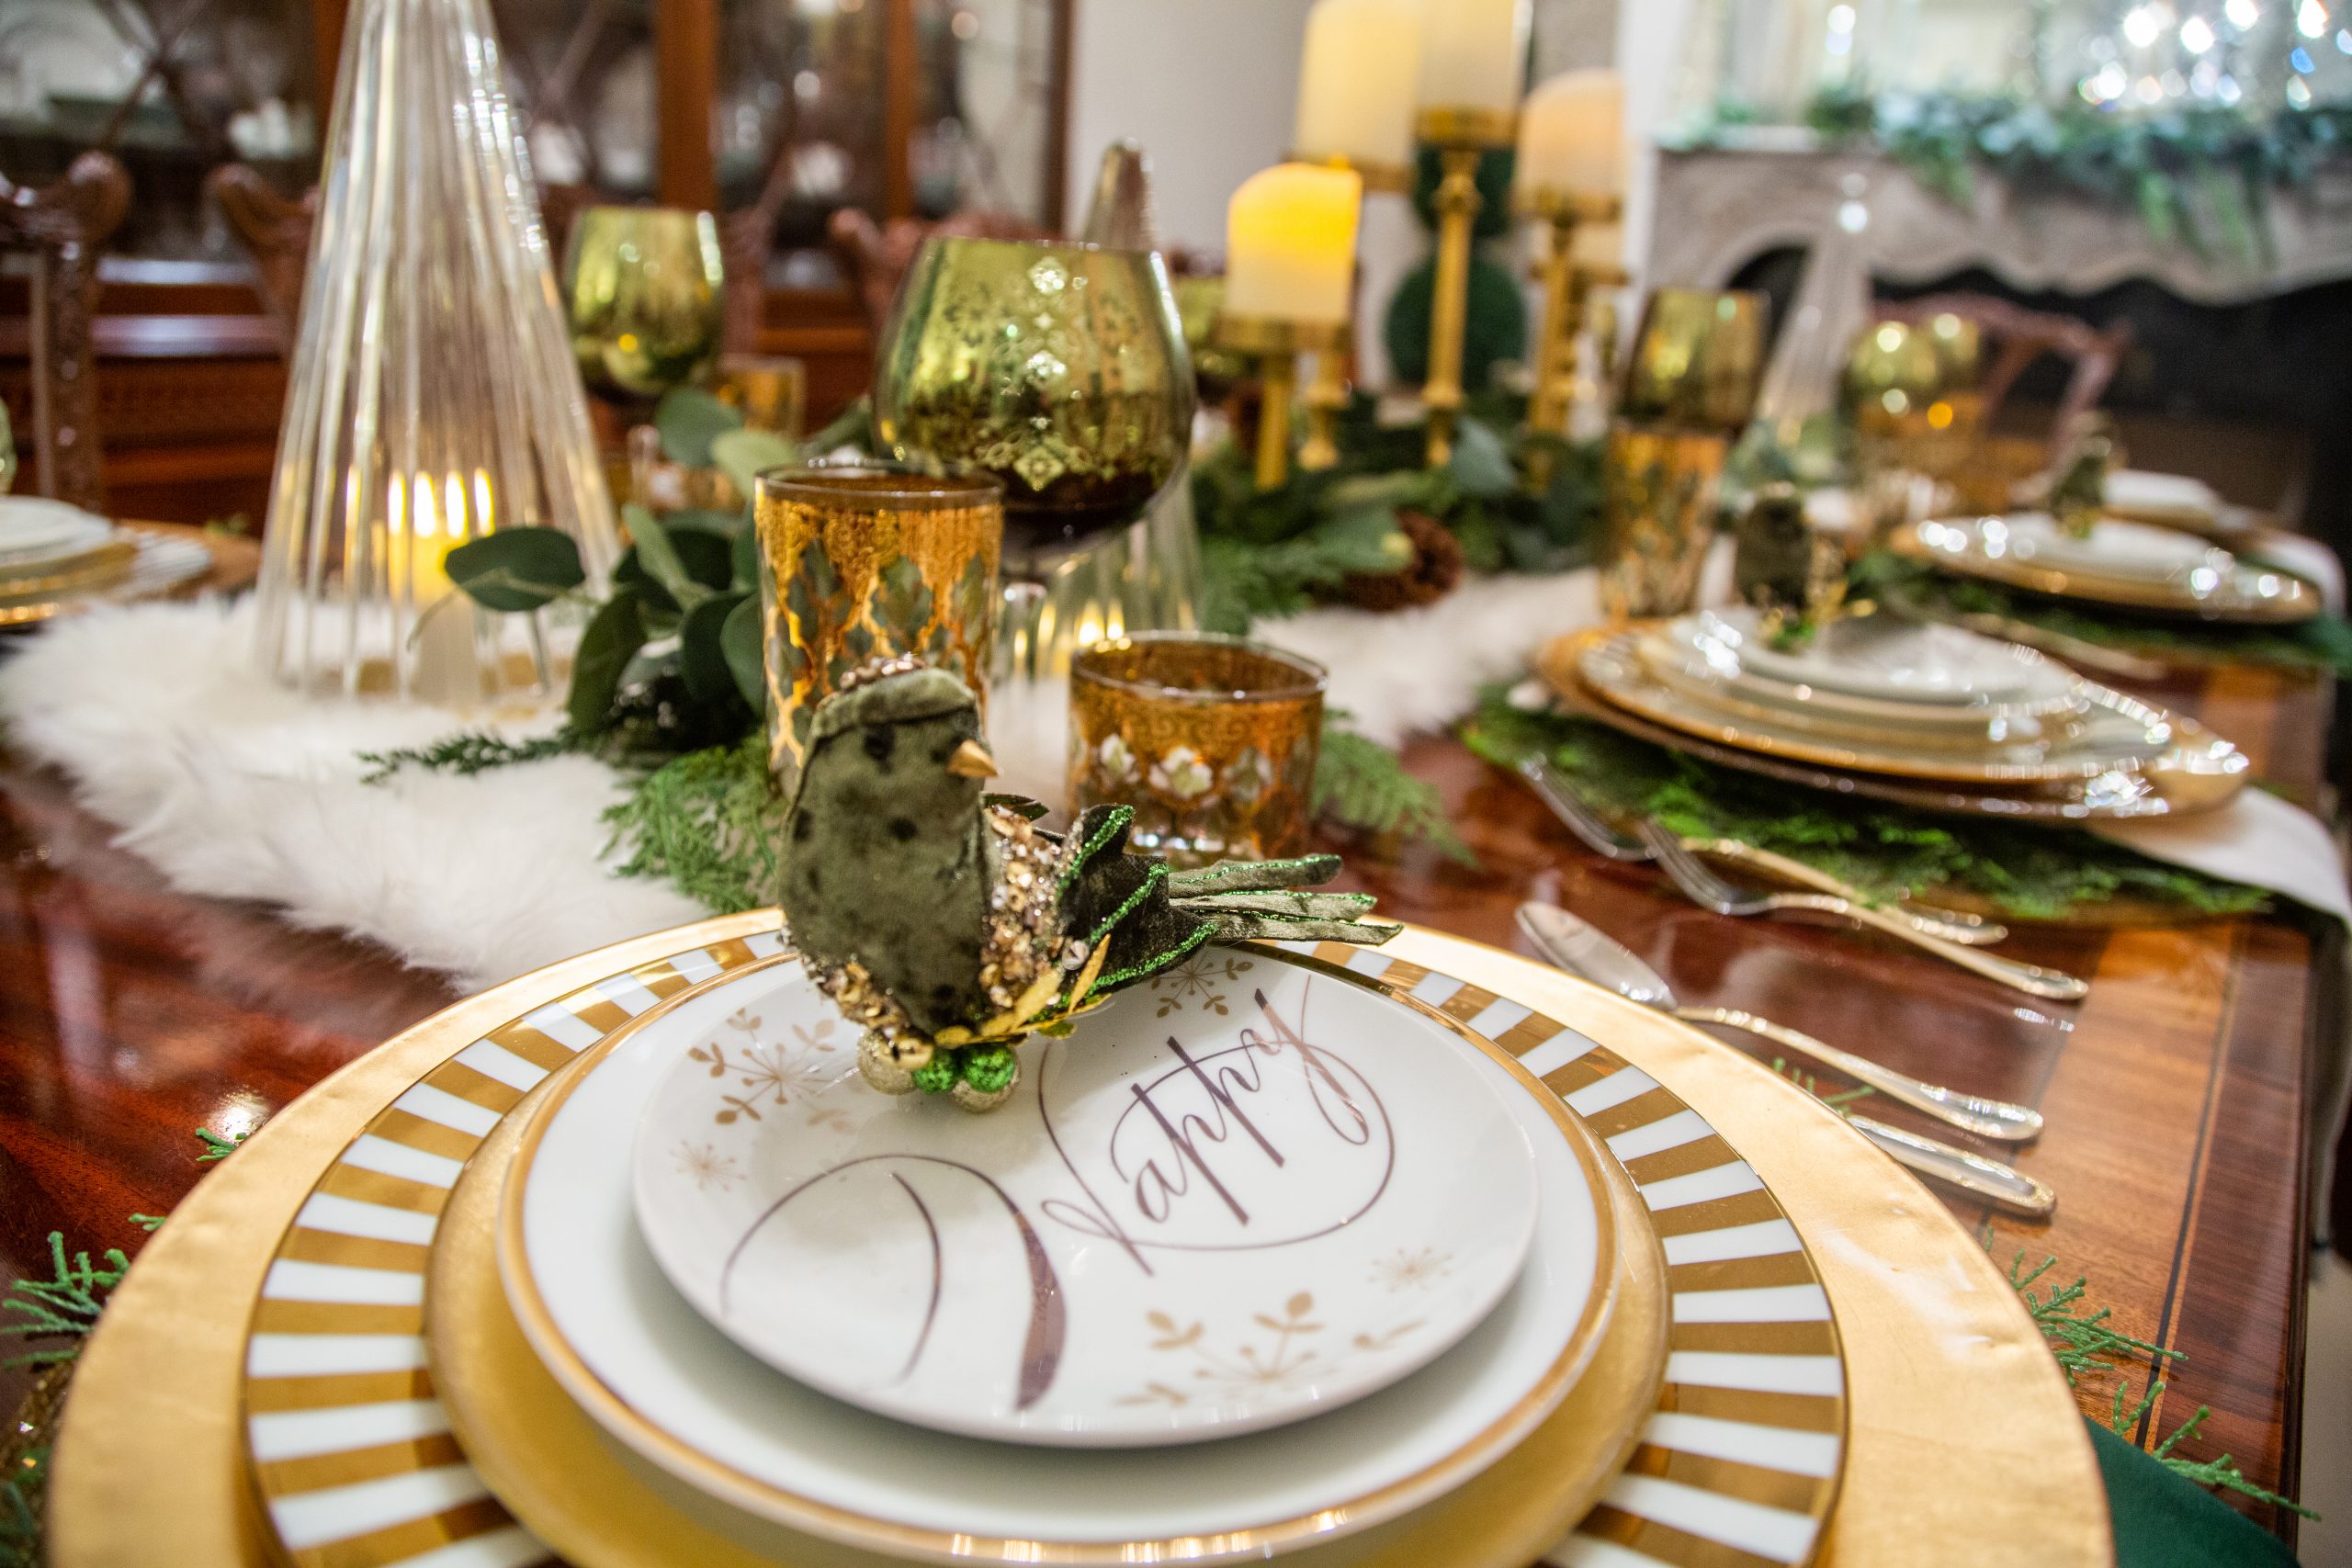 Chateau Chic POV December 2021

(Photo by Misty Leigh McElroy)
[date}